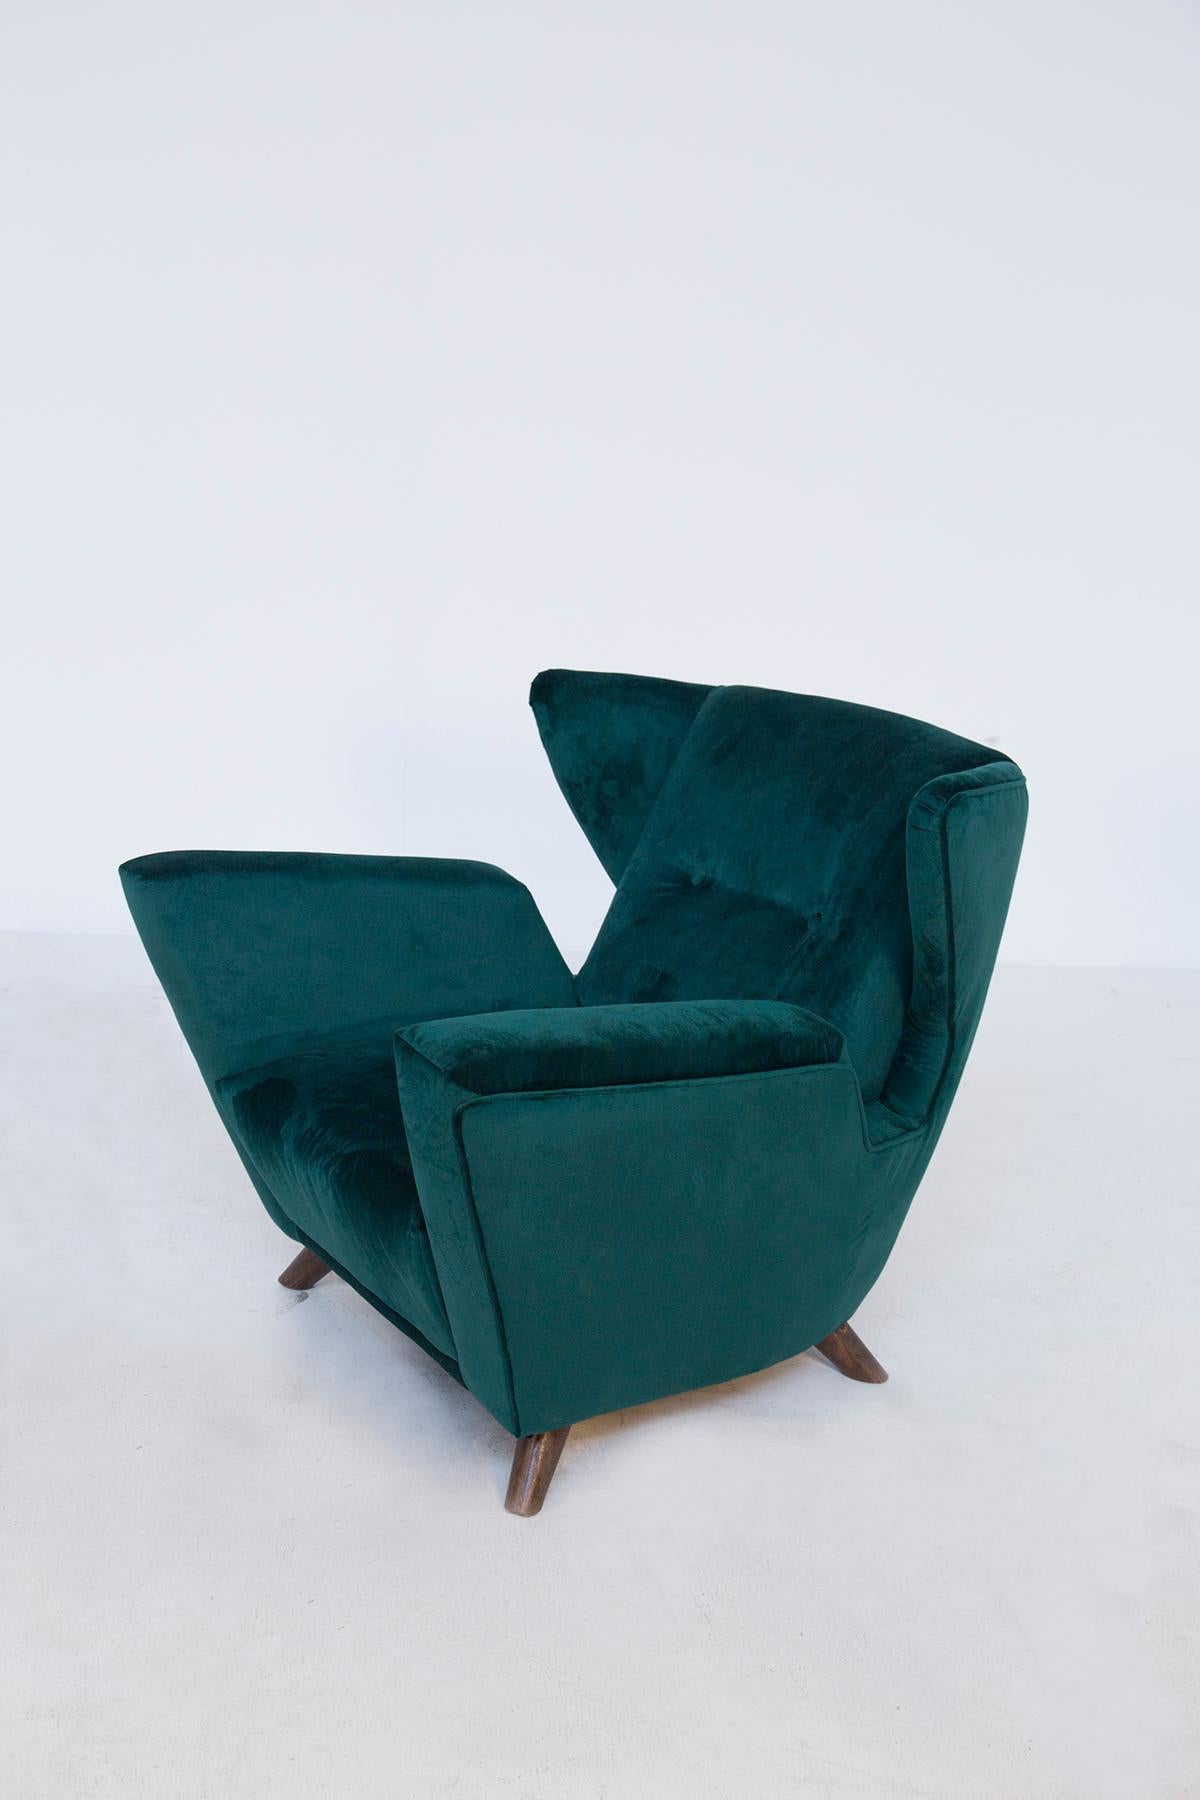 Pair of Italian armchairs attributed to Gio Ponti for the Ships. The armchairs have been restored in an elegant green velvet. The beauty of the armchair is given by its geometric shapes or with pointed volumes, almost its armrests turning upwards.